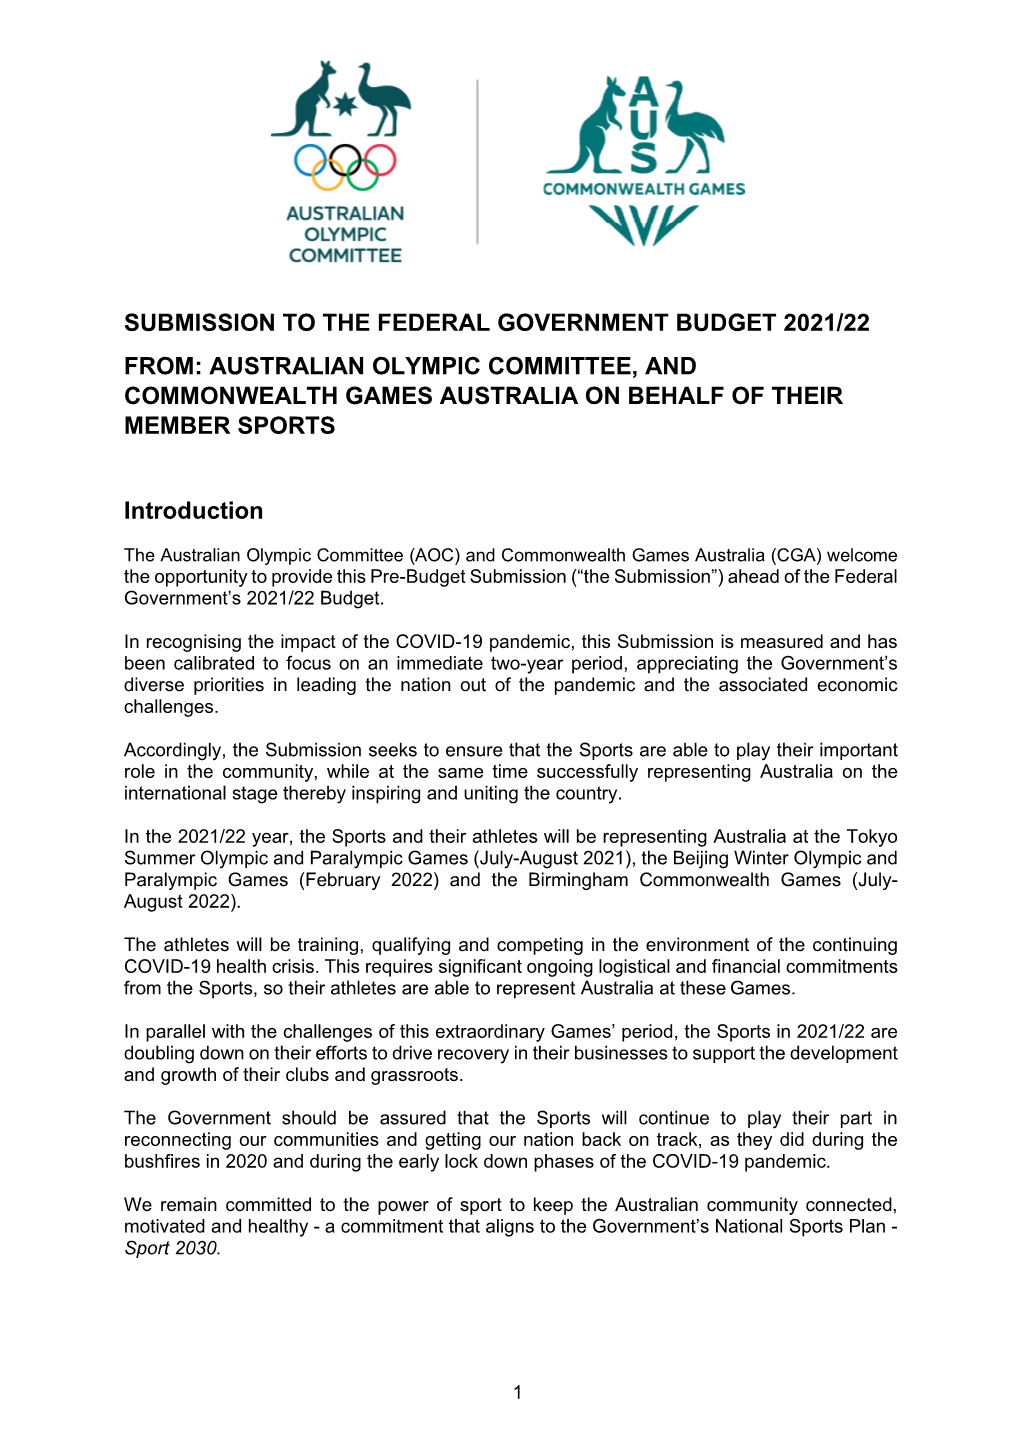 Australian Olympic Committee and Commonwealth Games